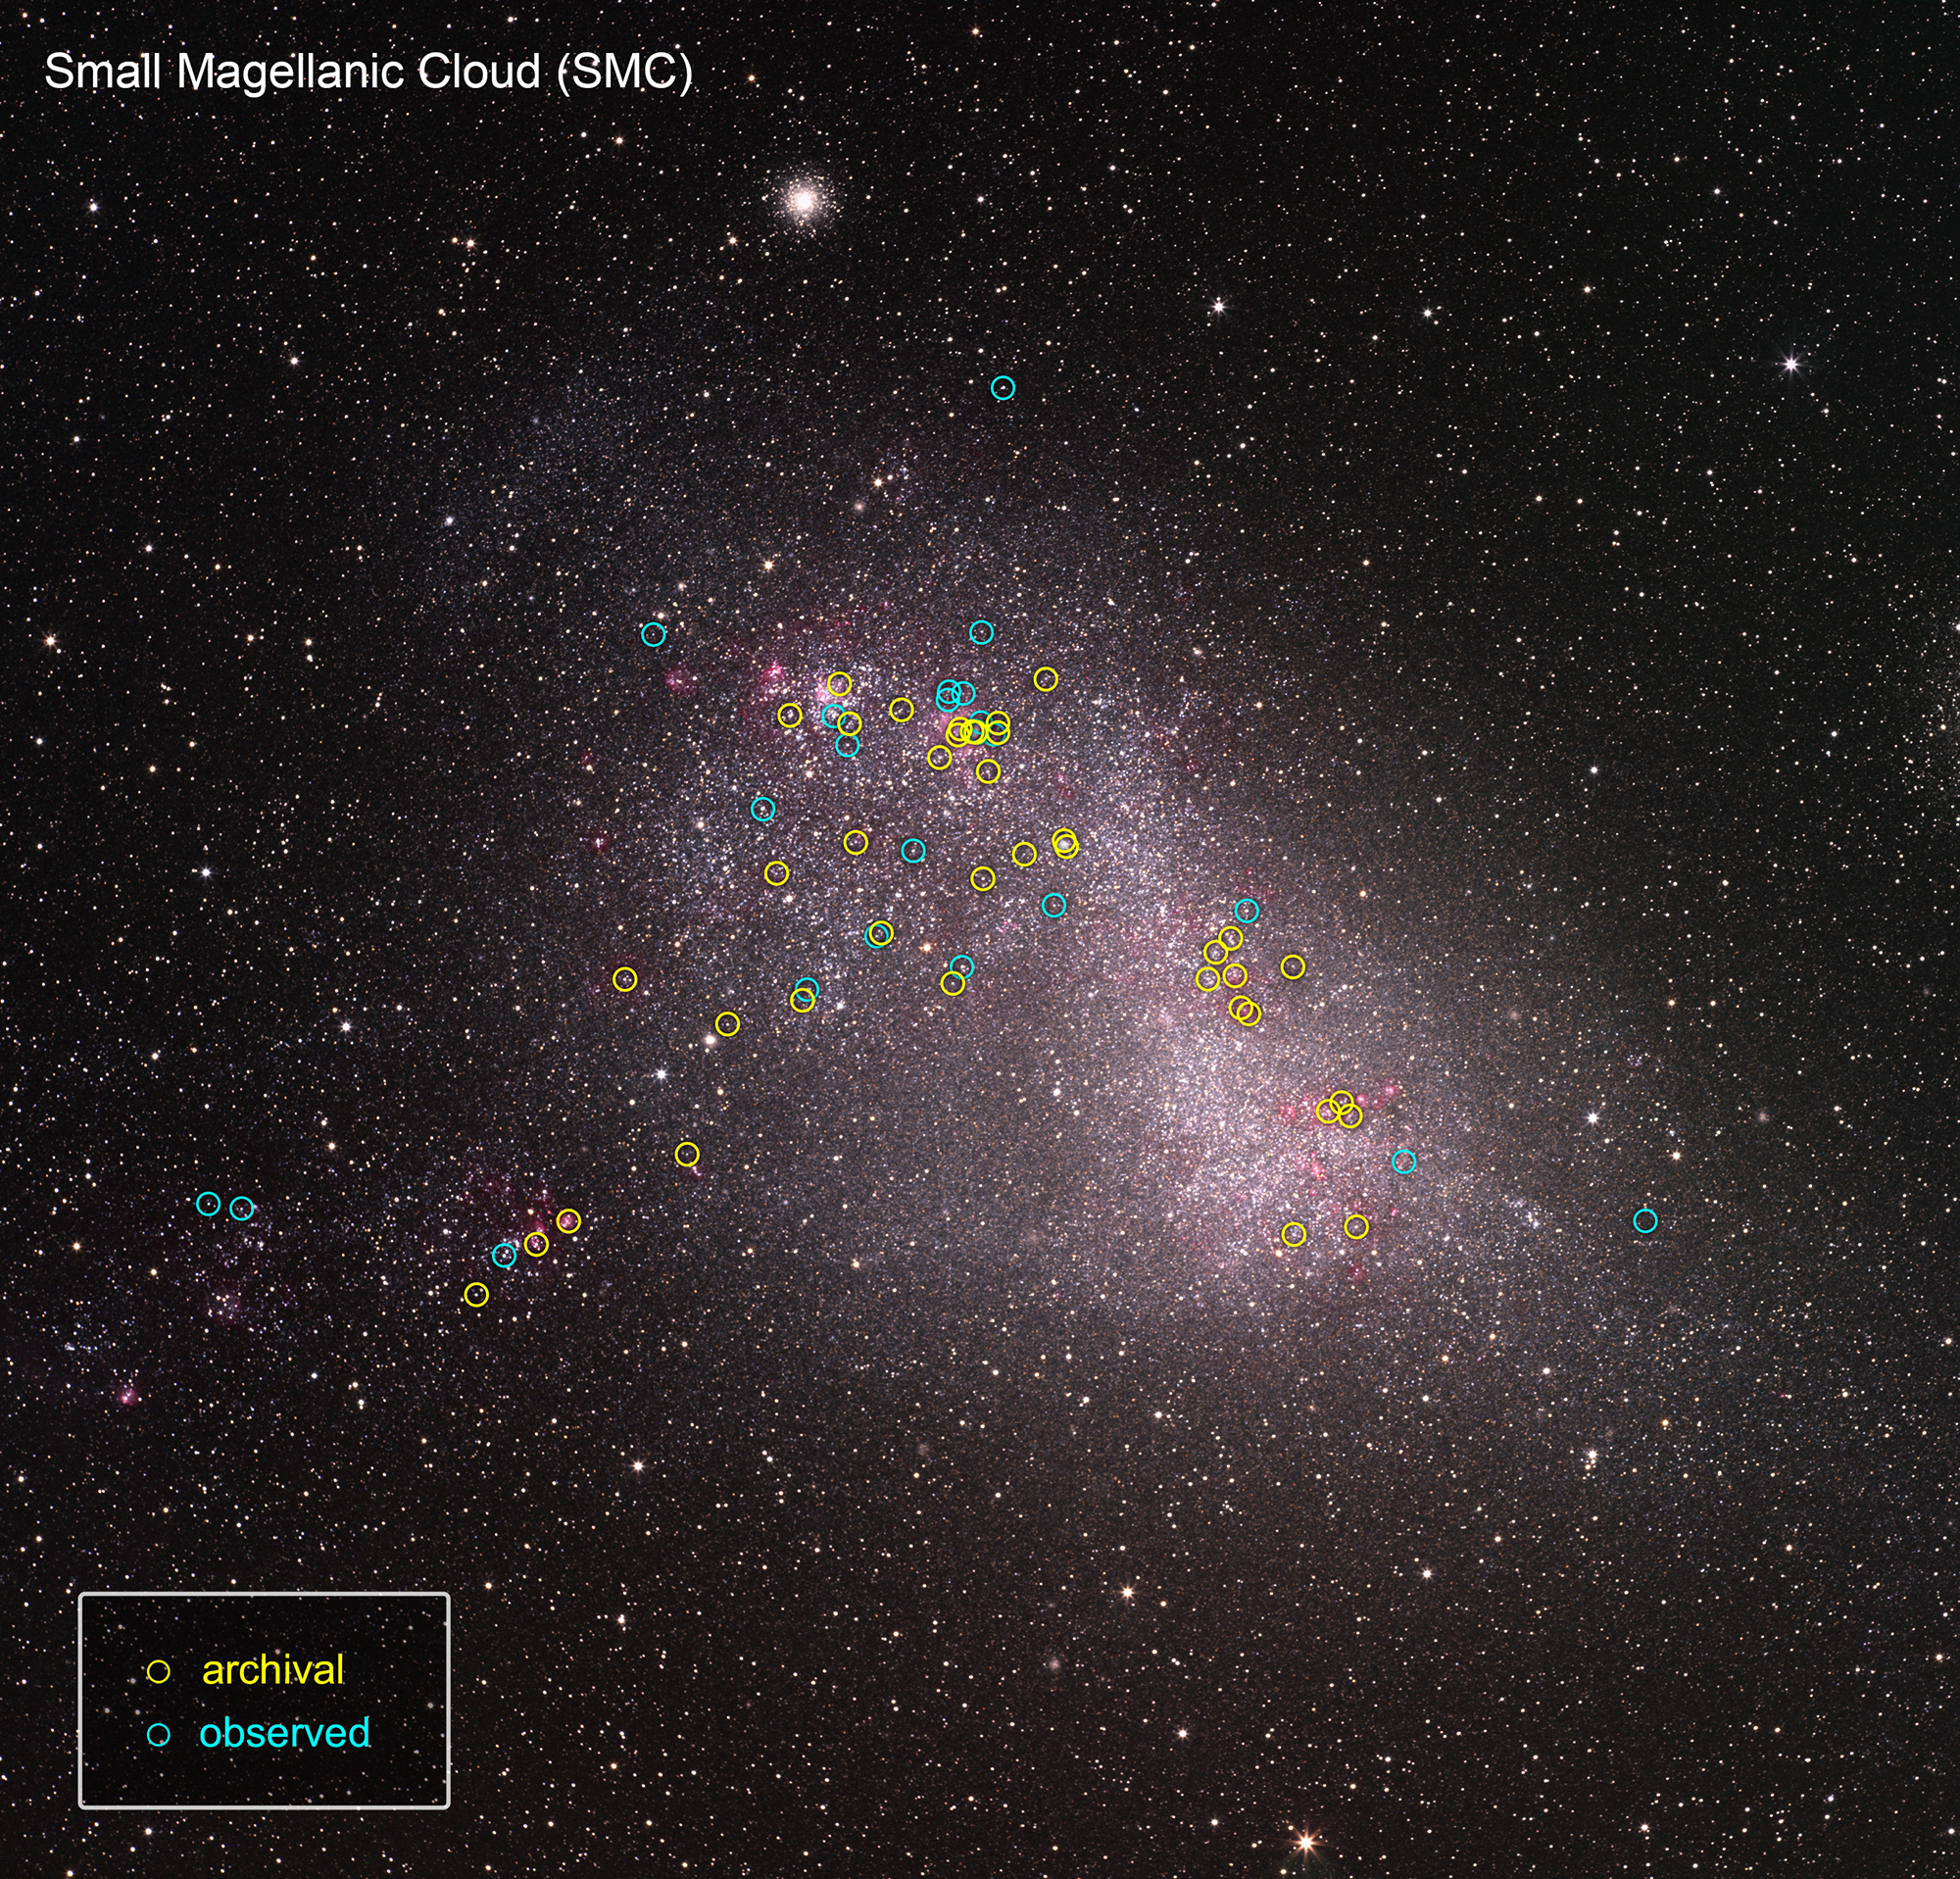 This is a ground-based telescopic photo of the Small Magellanic Cloud (SMC), a satellite galaxy of our Milky Way.